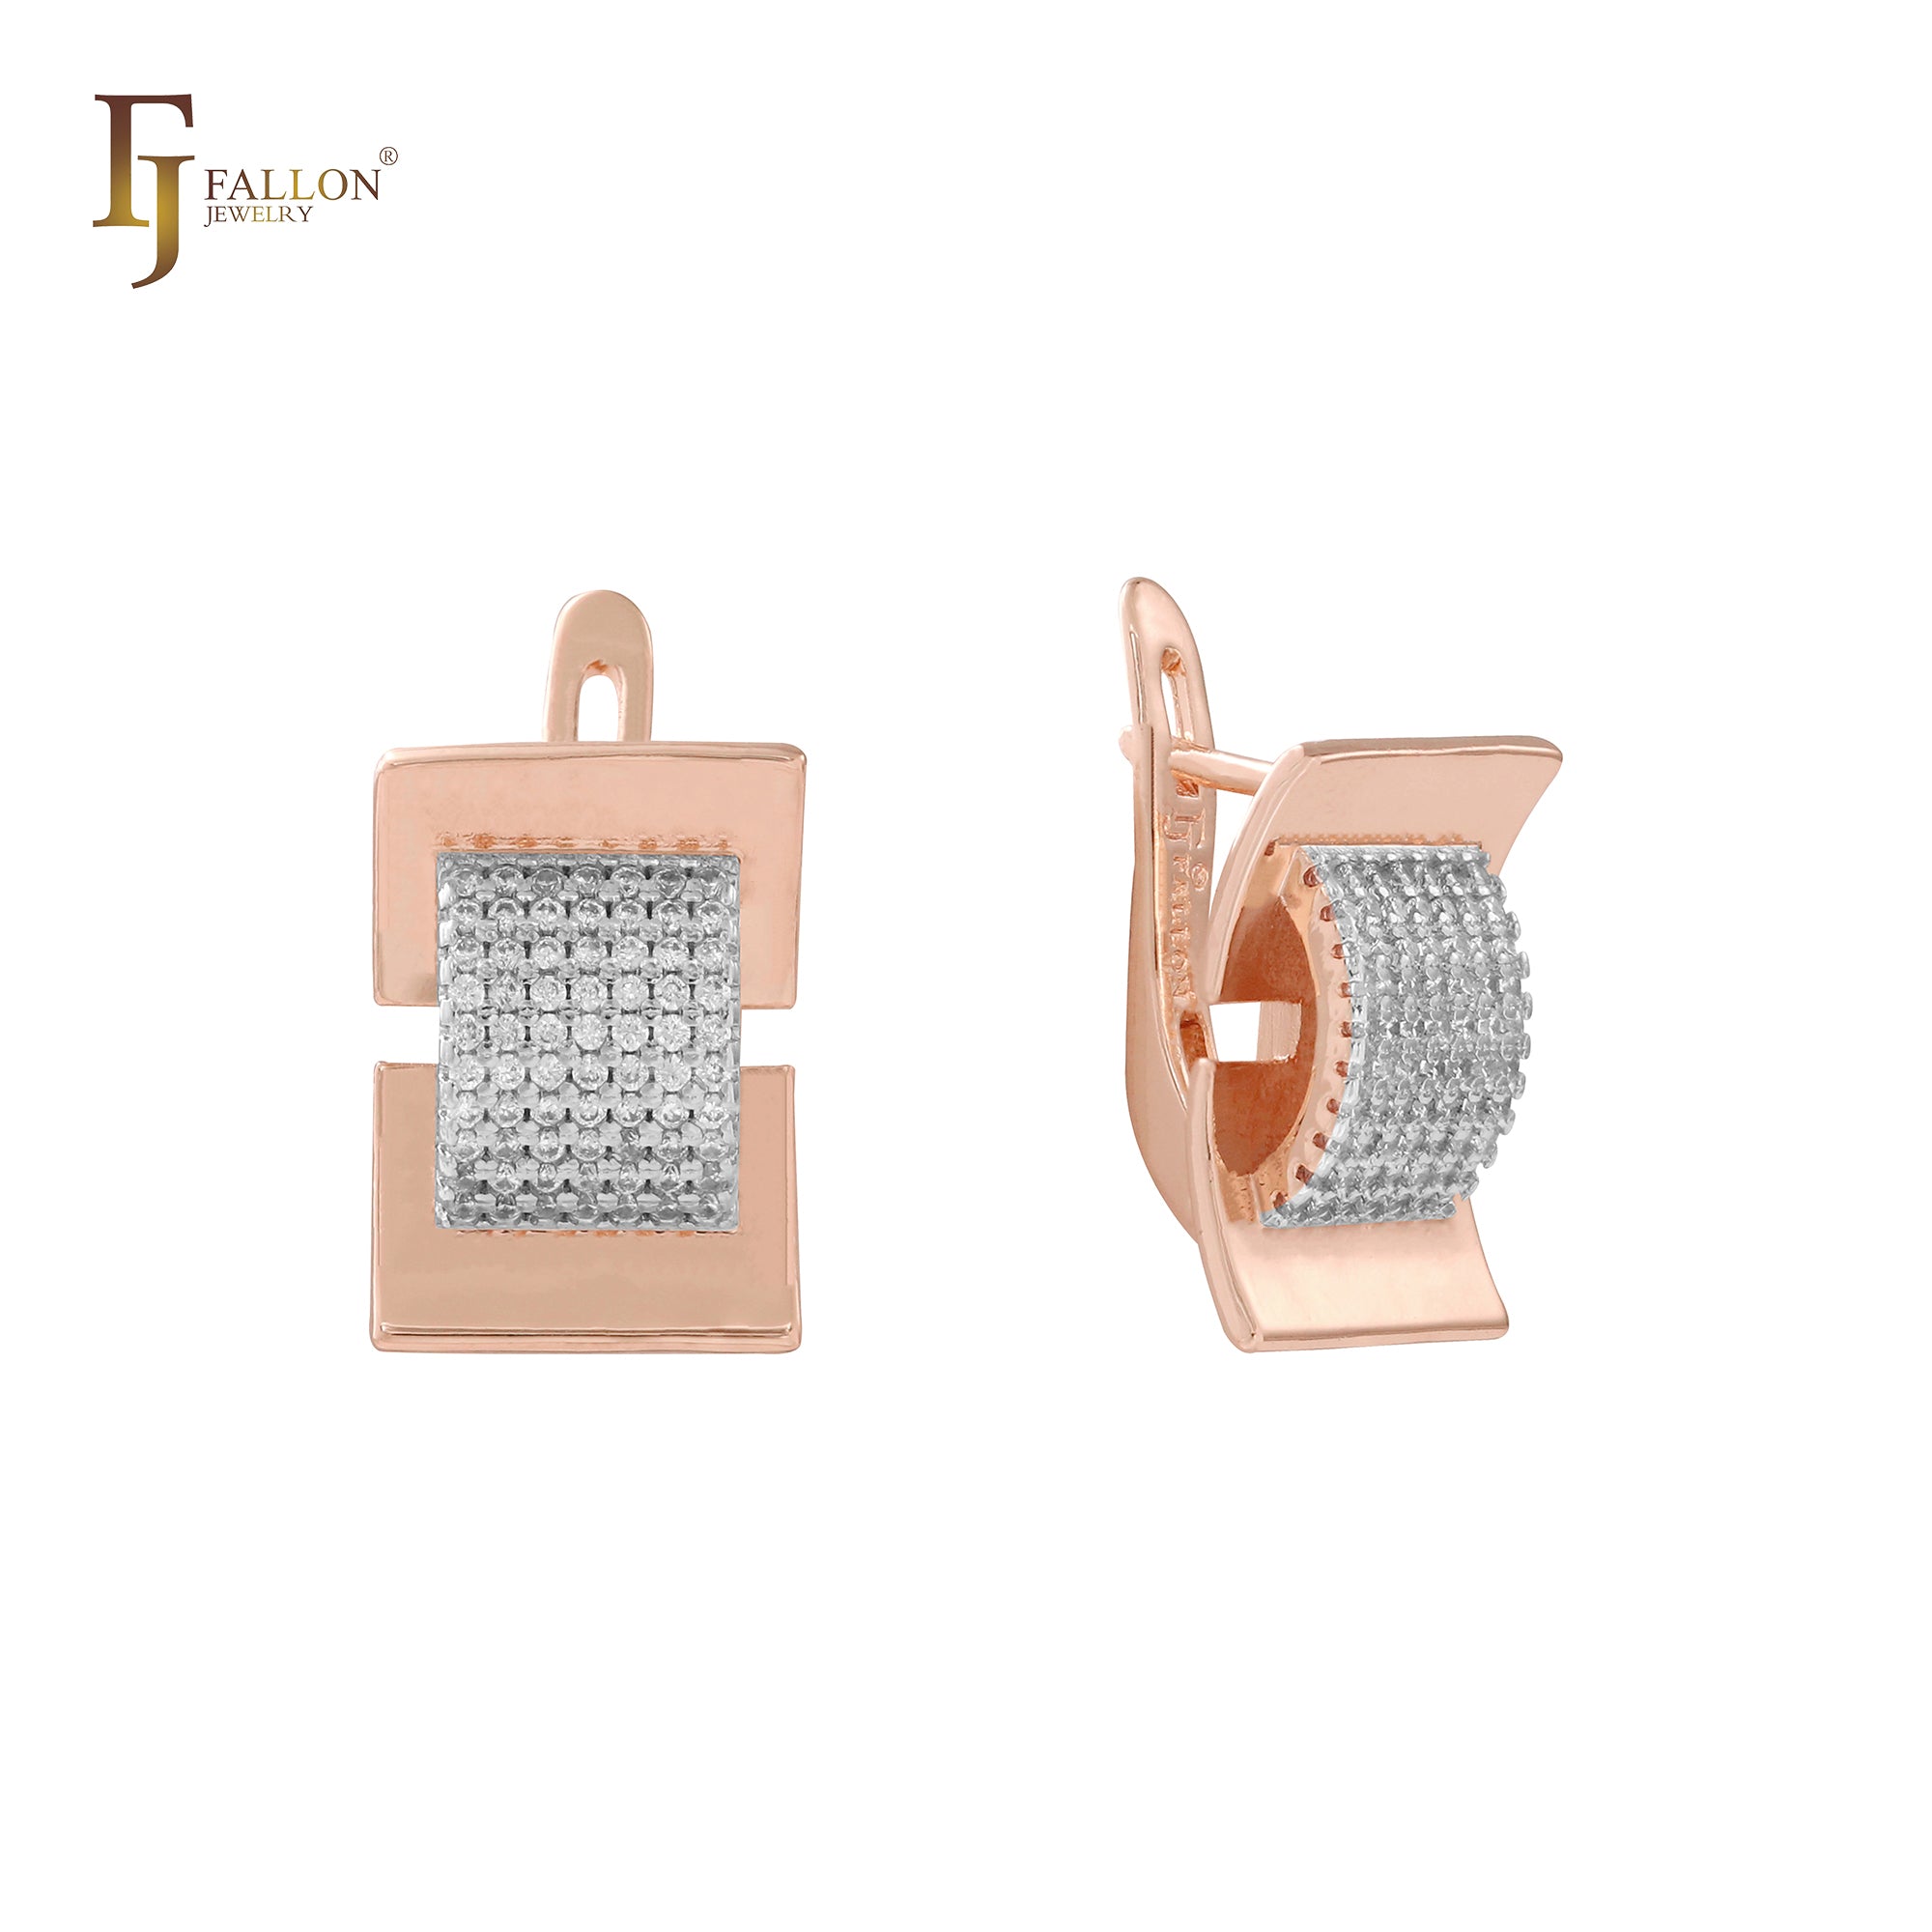 Open Wide cluster white CZs 14K Gold, Rose Gold, White Gold earrings